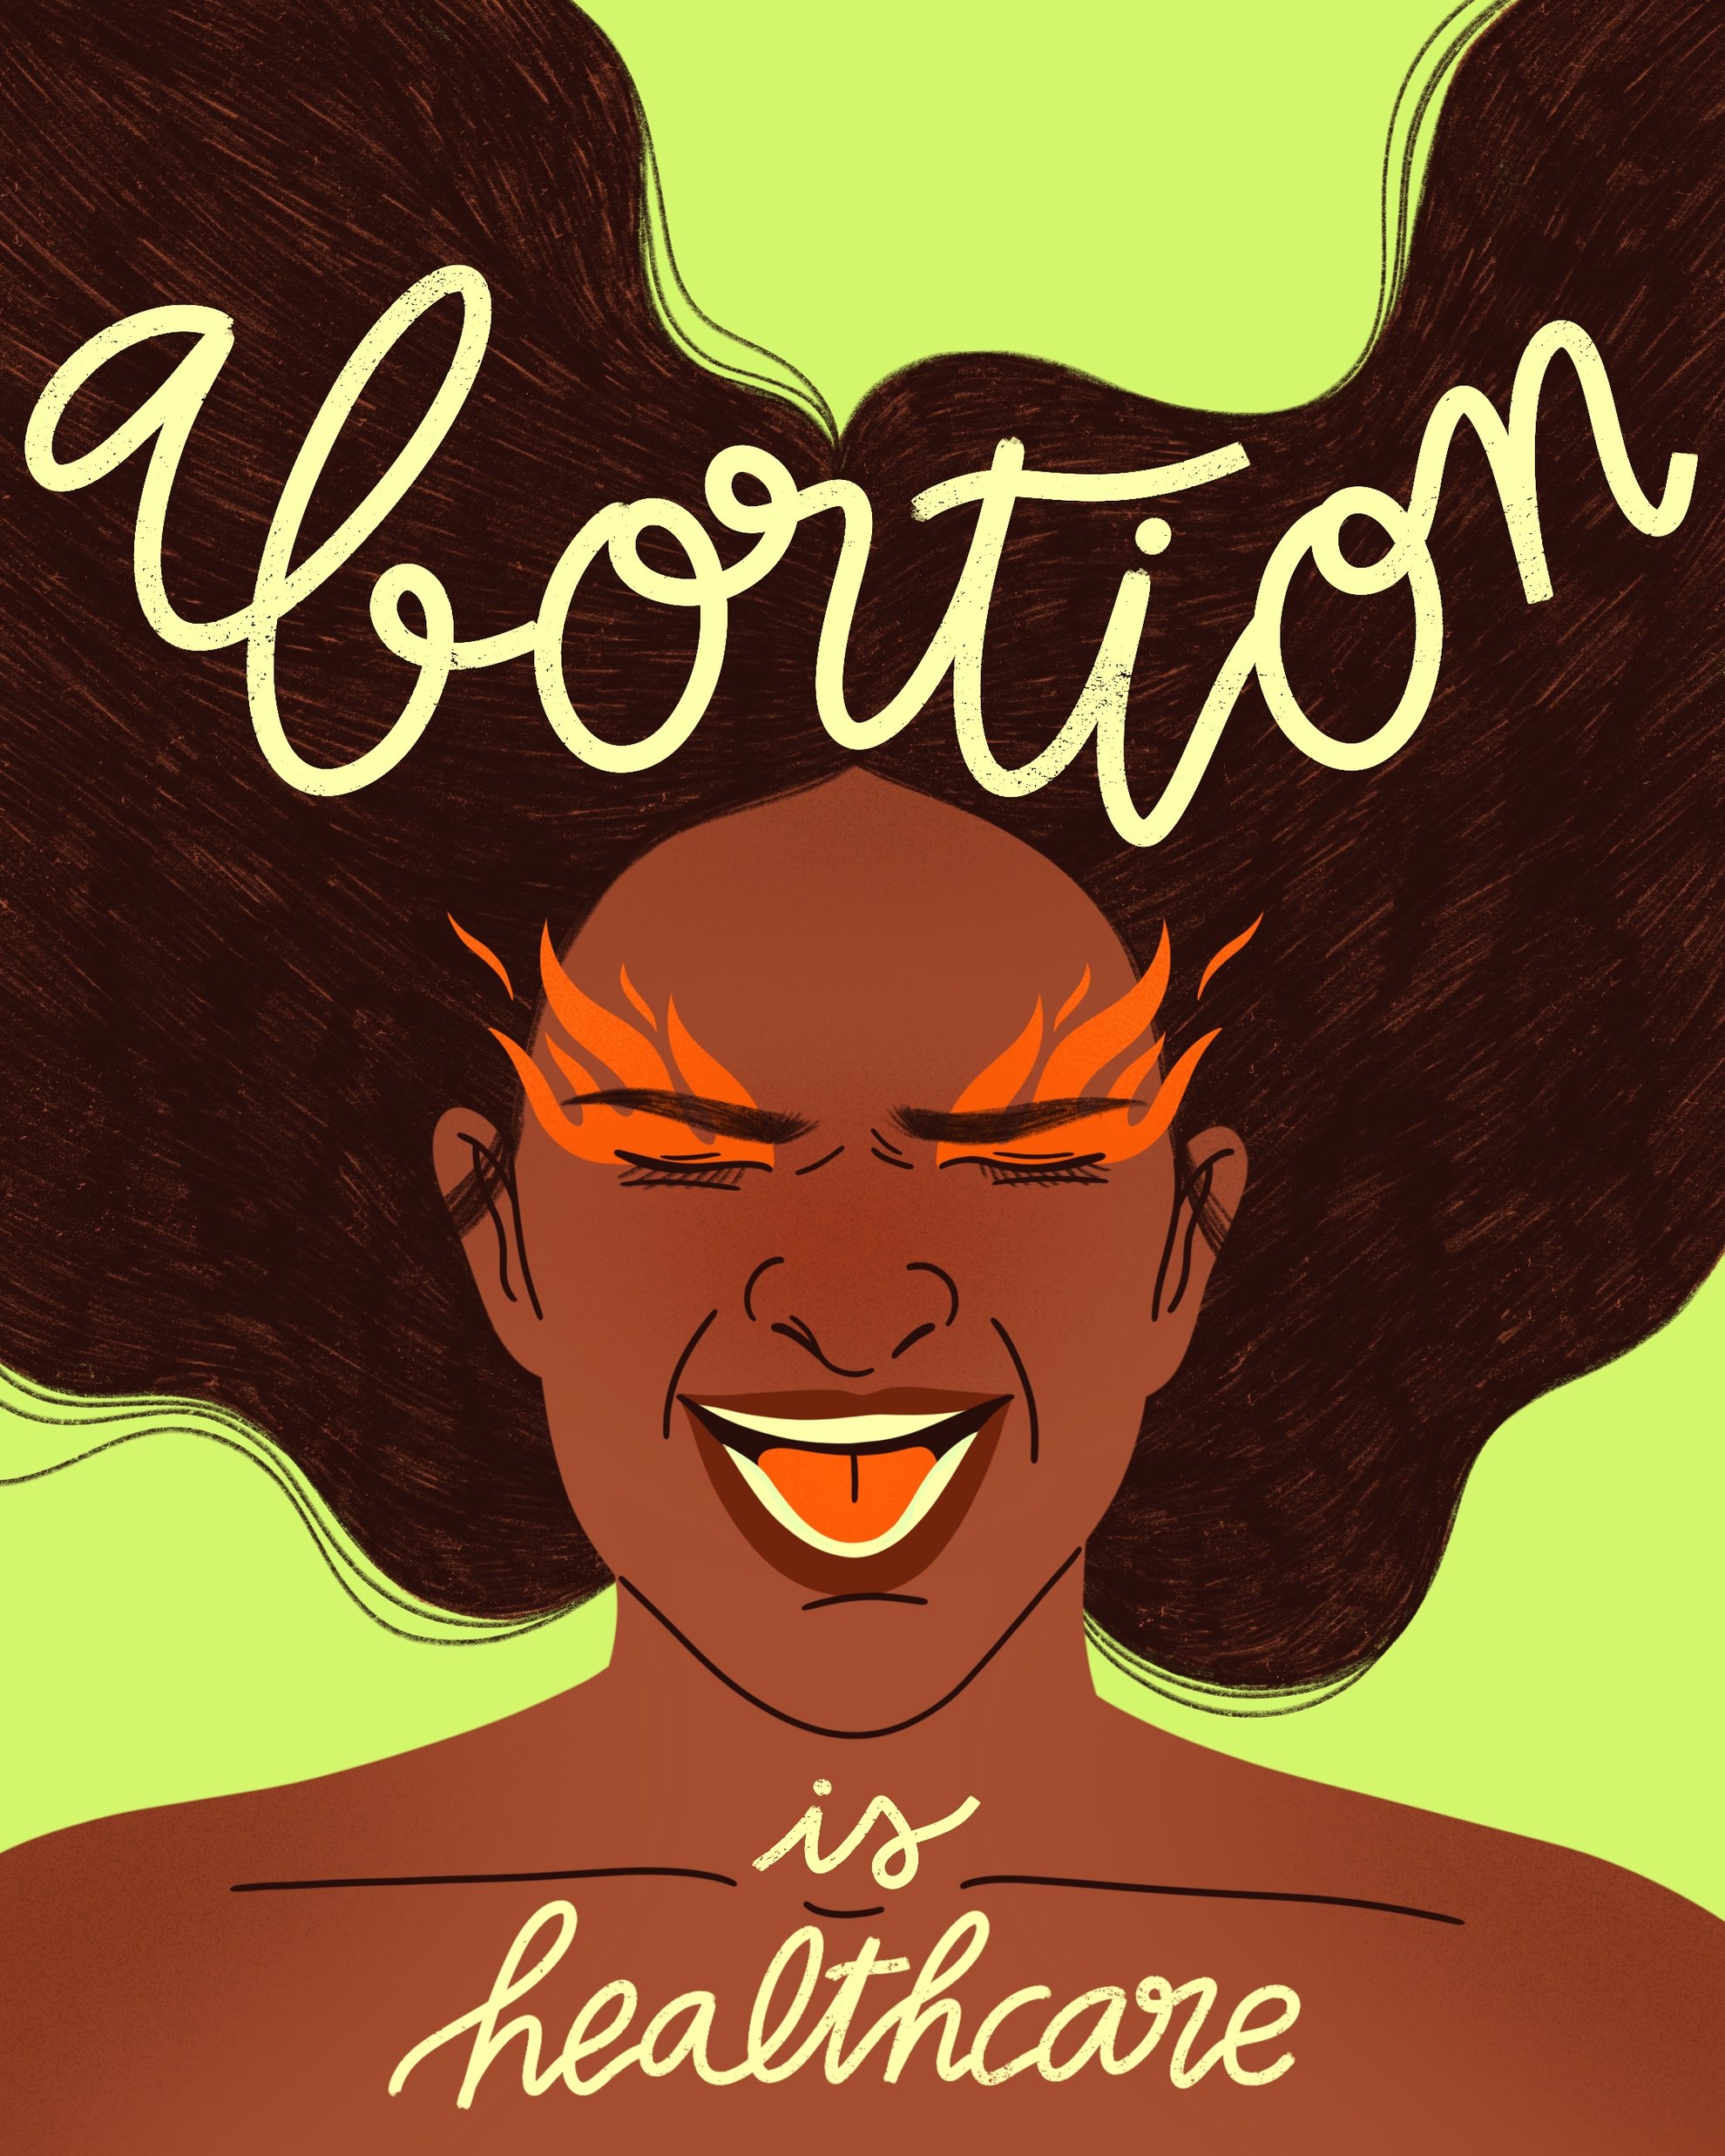 Abortion is healthcare